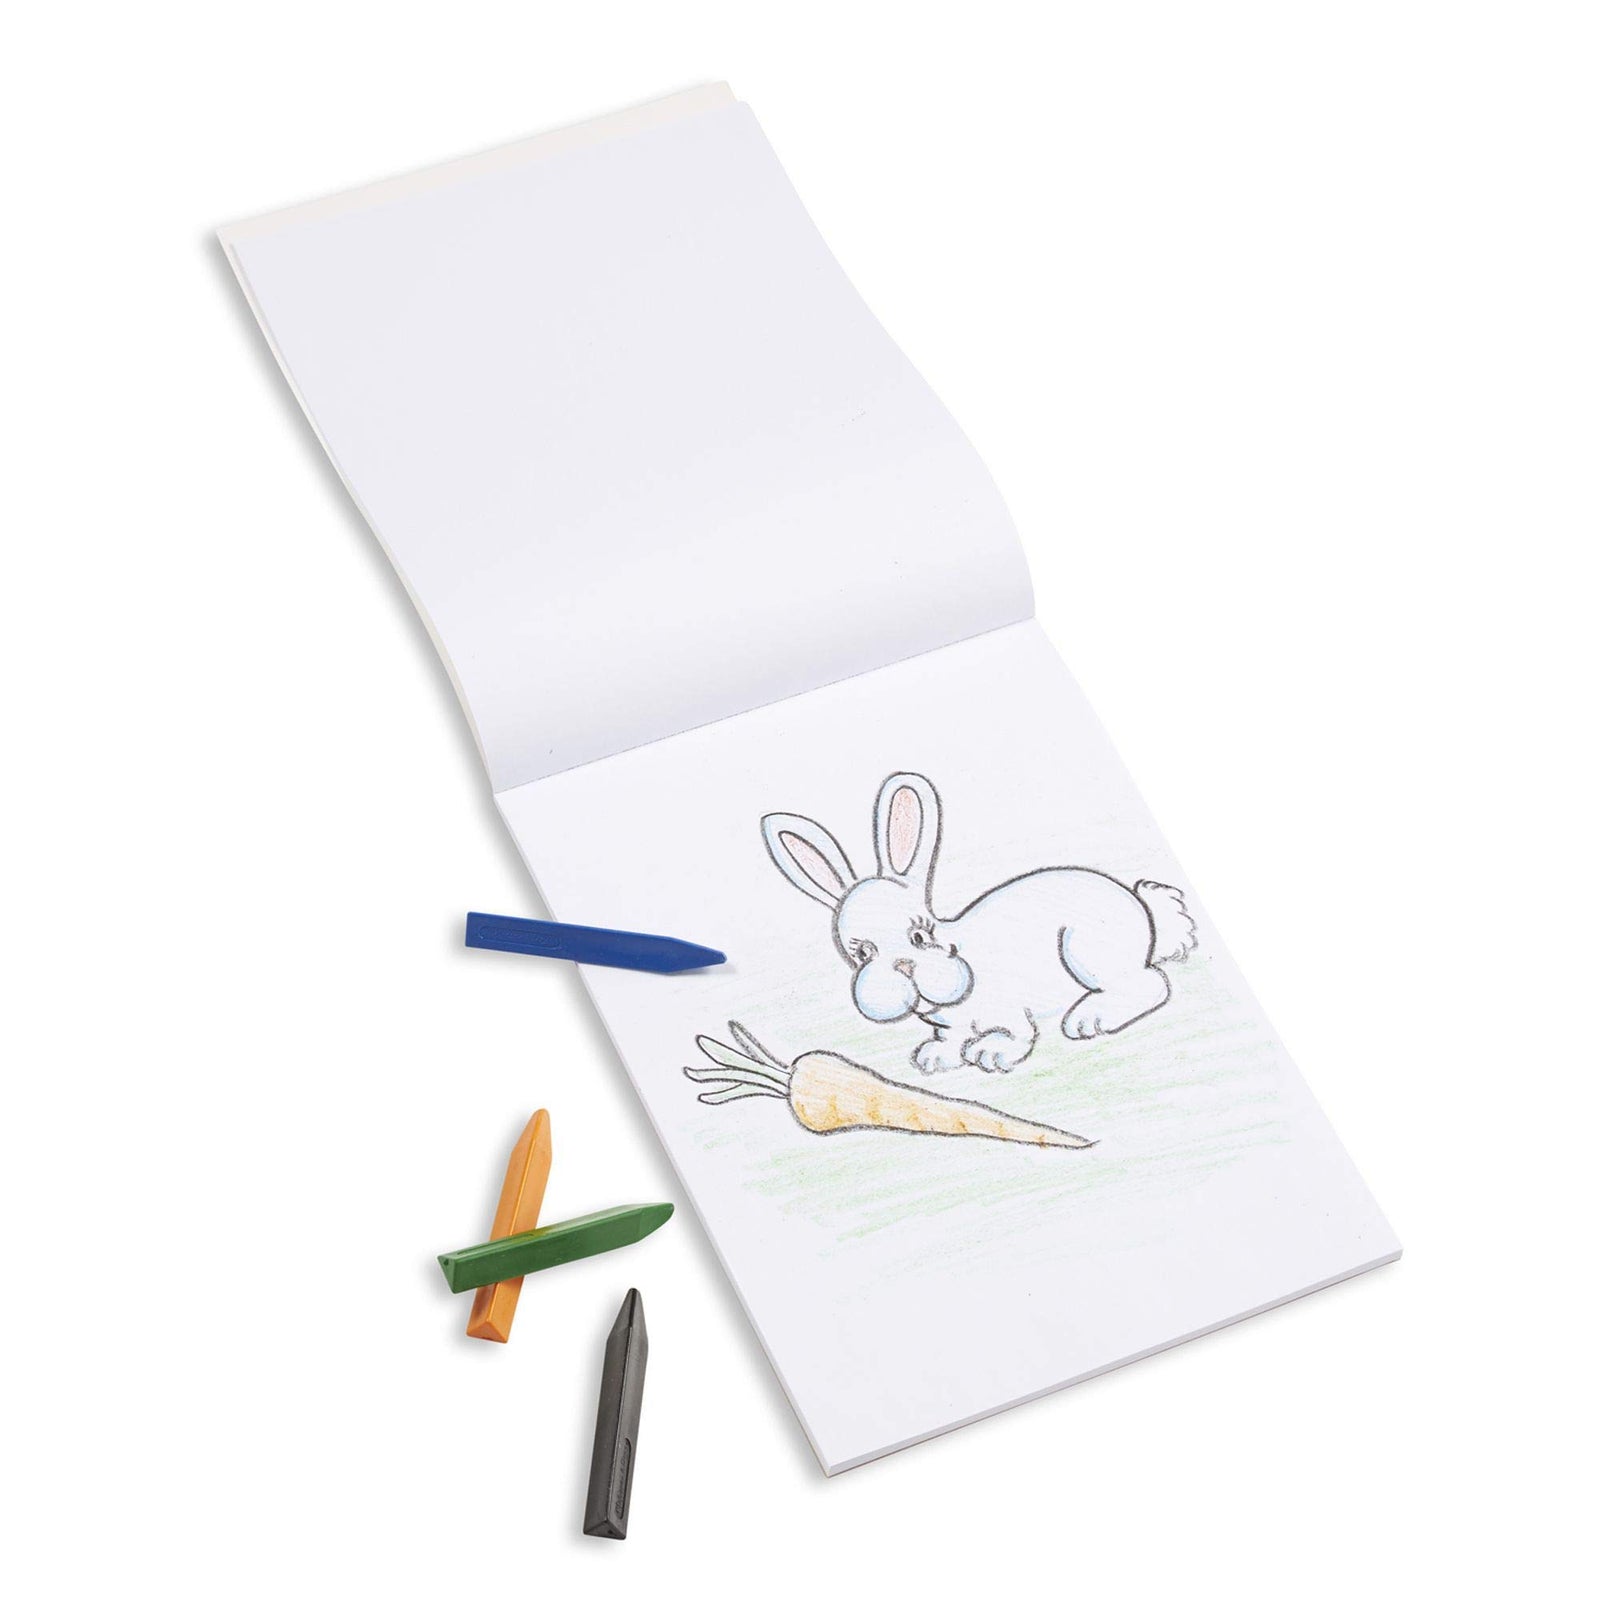 Melissa & Doug Drawing Paper Pad (6 x 9 inches) - 50 Sheets, 4-Pack